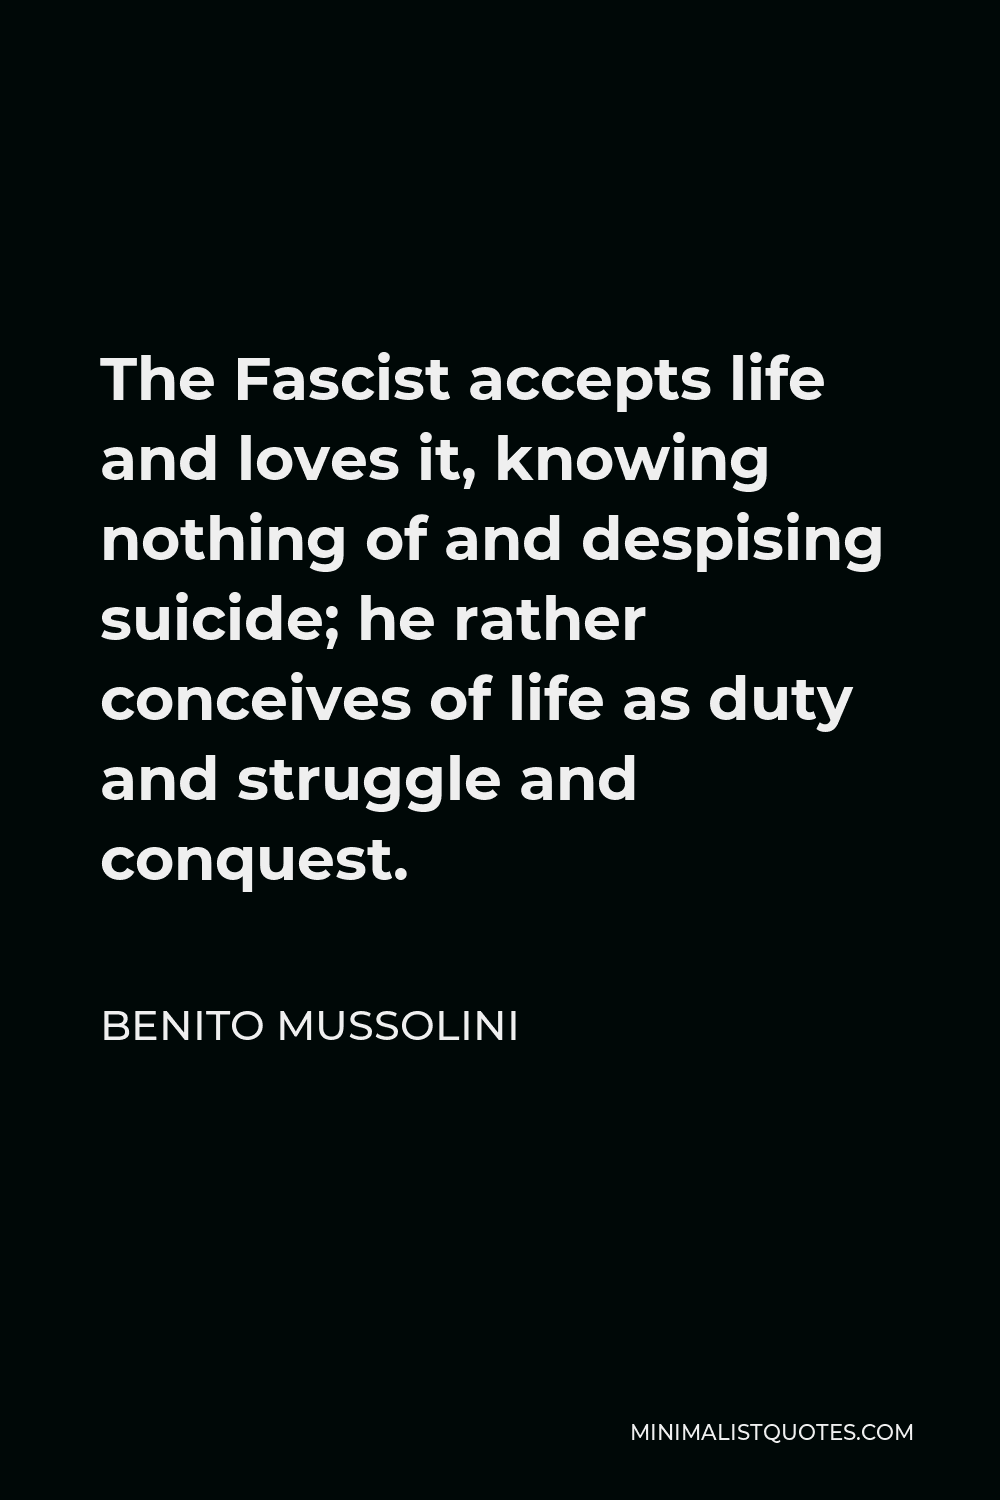 Benito Mussolini Quote - The Fascist accepts life and loves it, knowing nothing of and despising suicide; he rather conceives of life as duty and struggle and conquest.